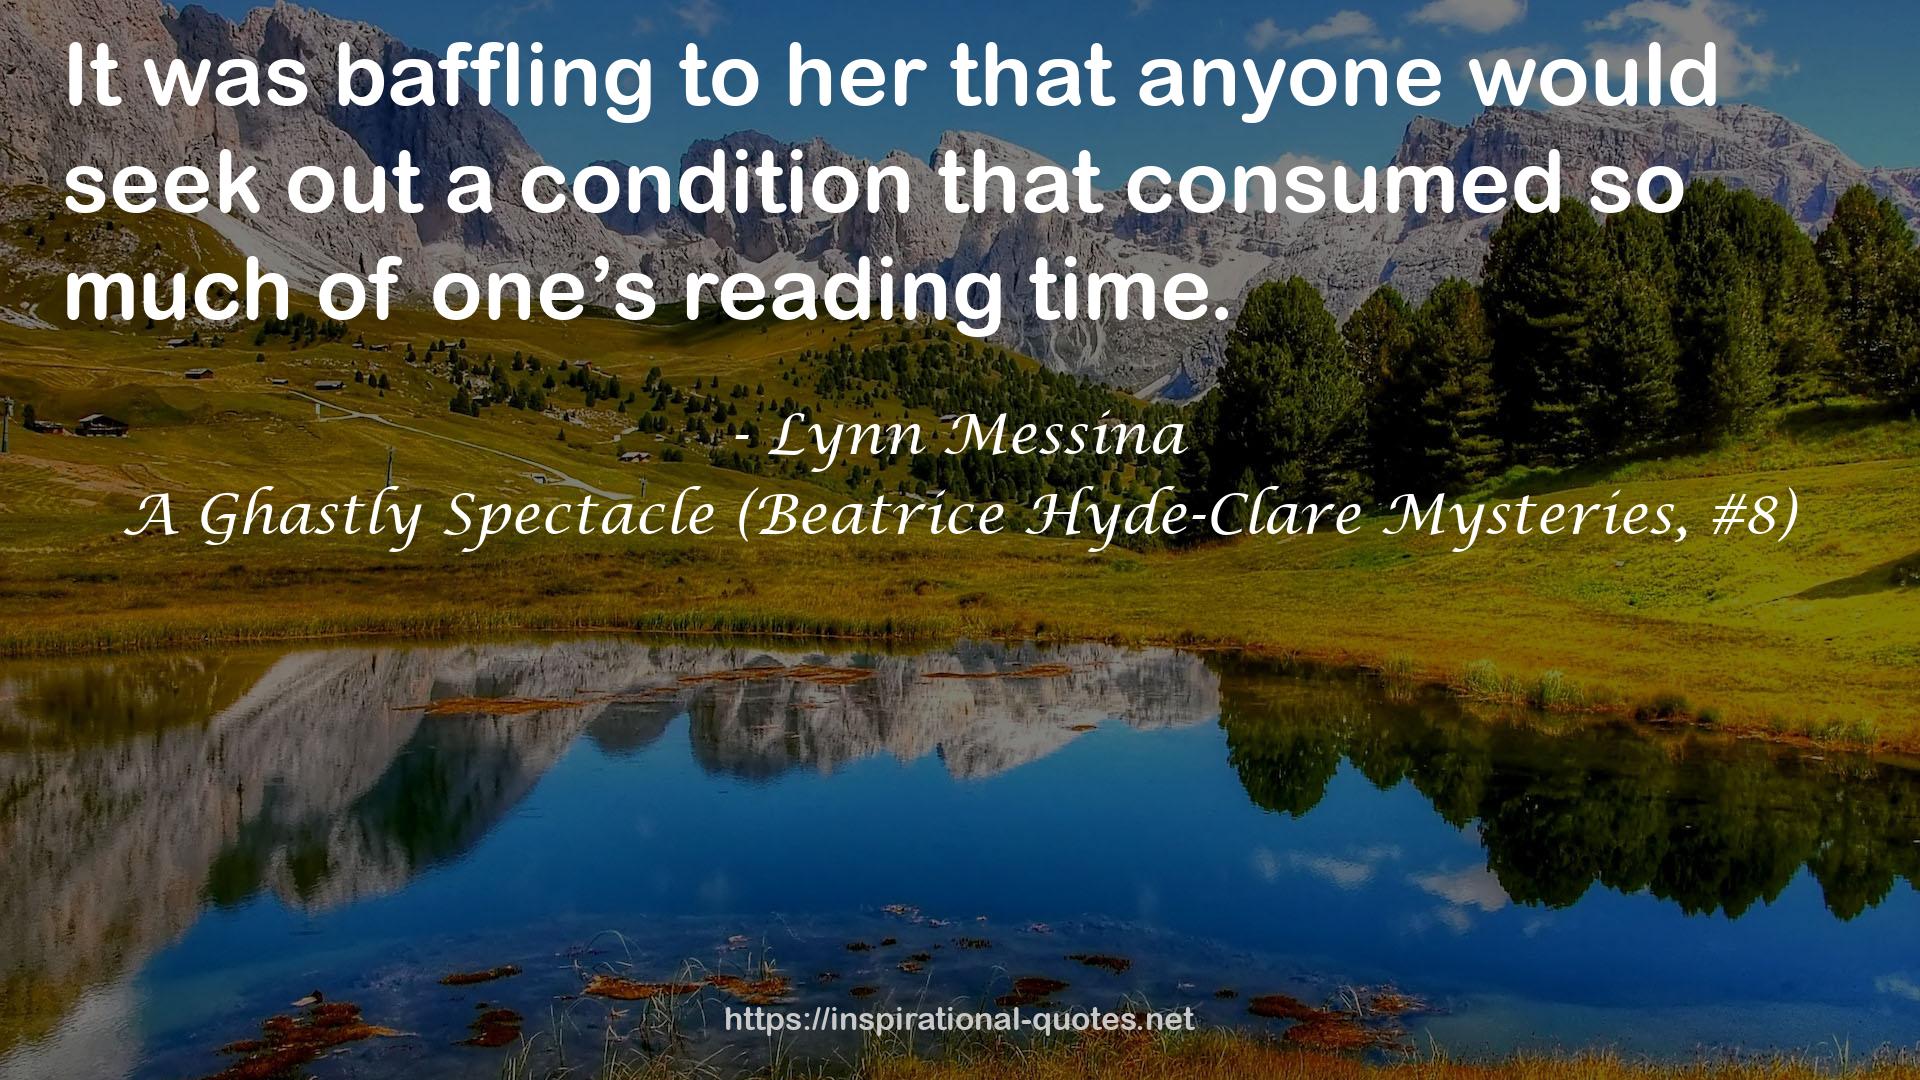 A Ghastly Spectacle (Beatrice Hyde-Clare Mysteries, #8) QUOTES